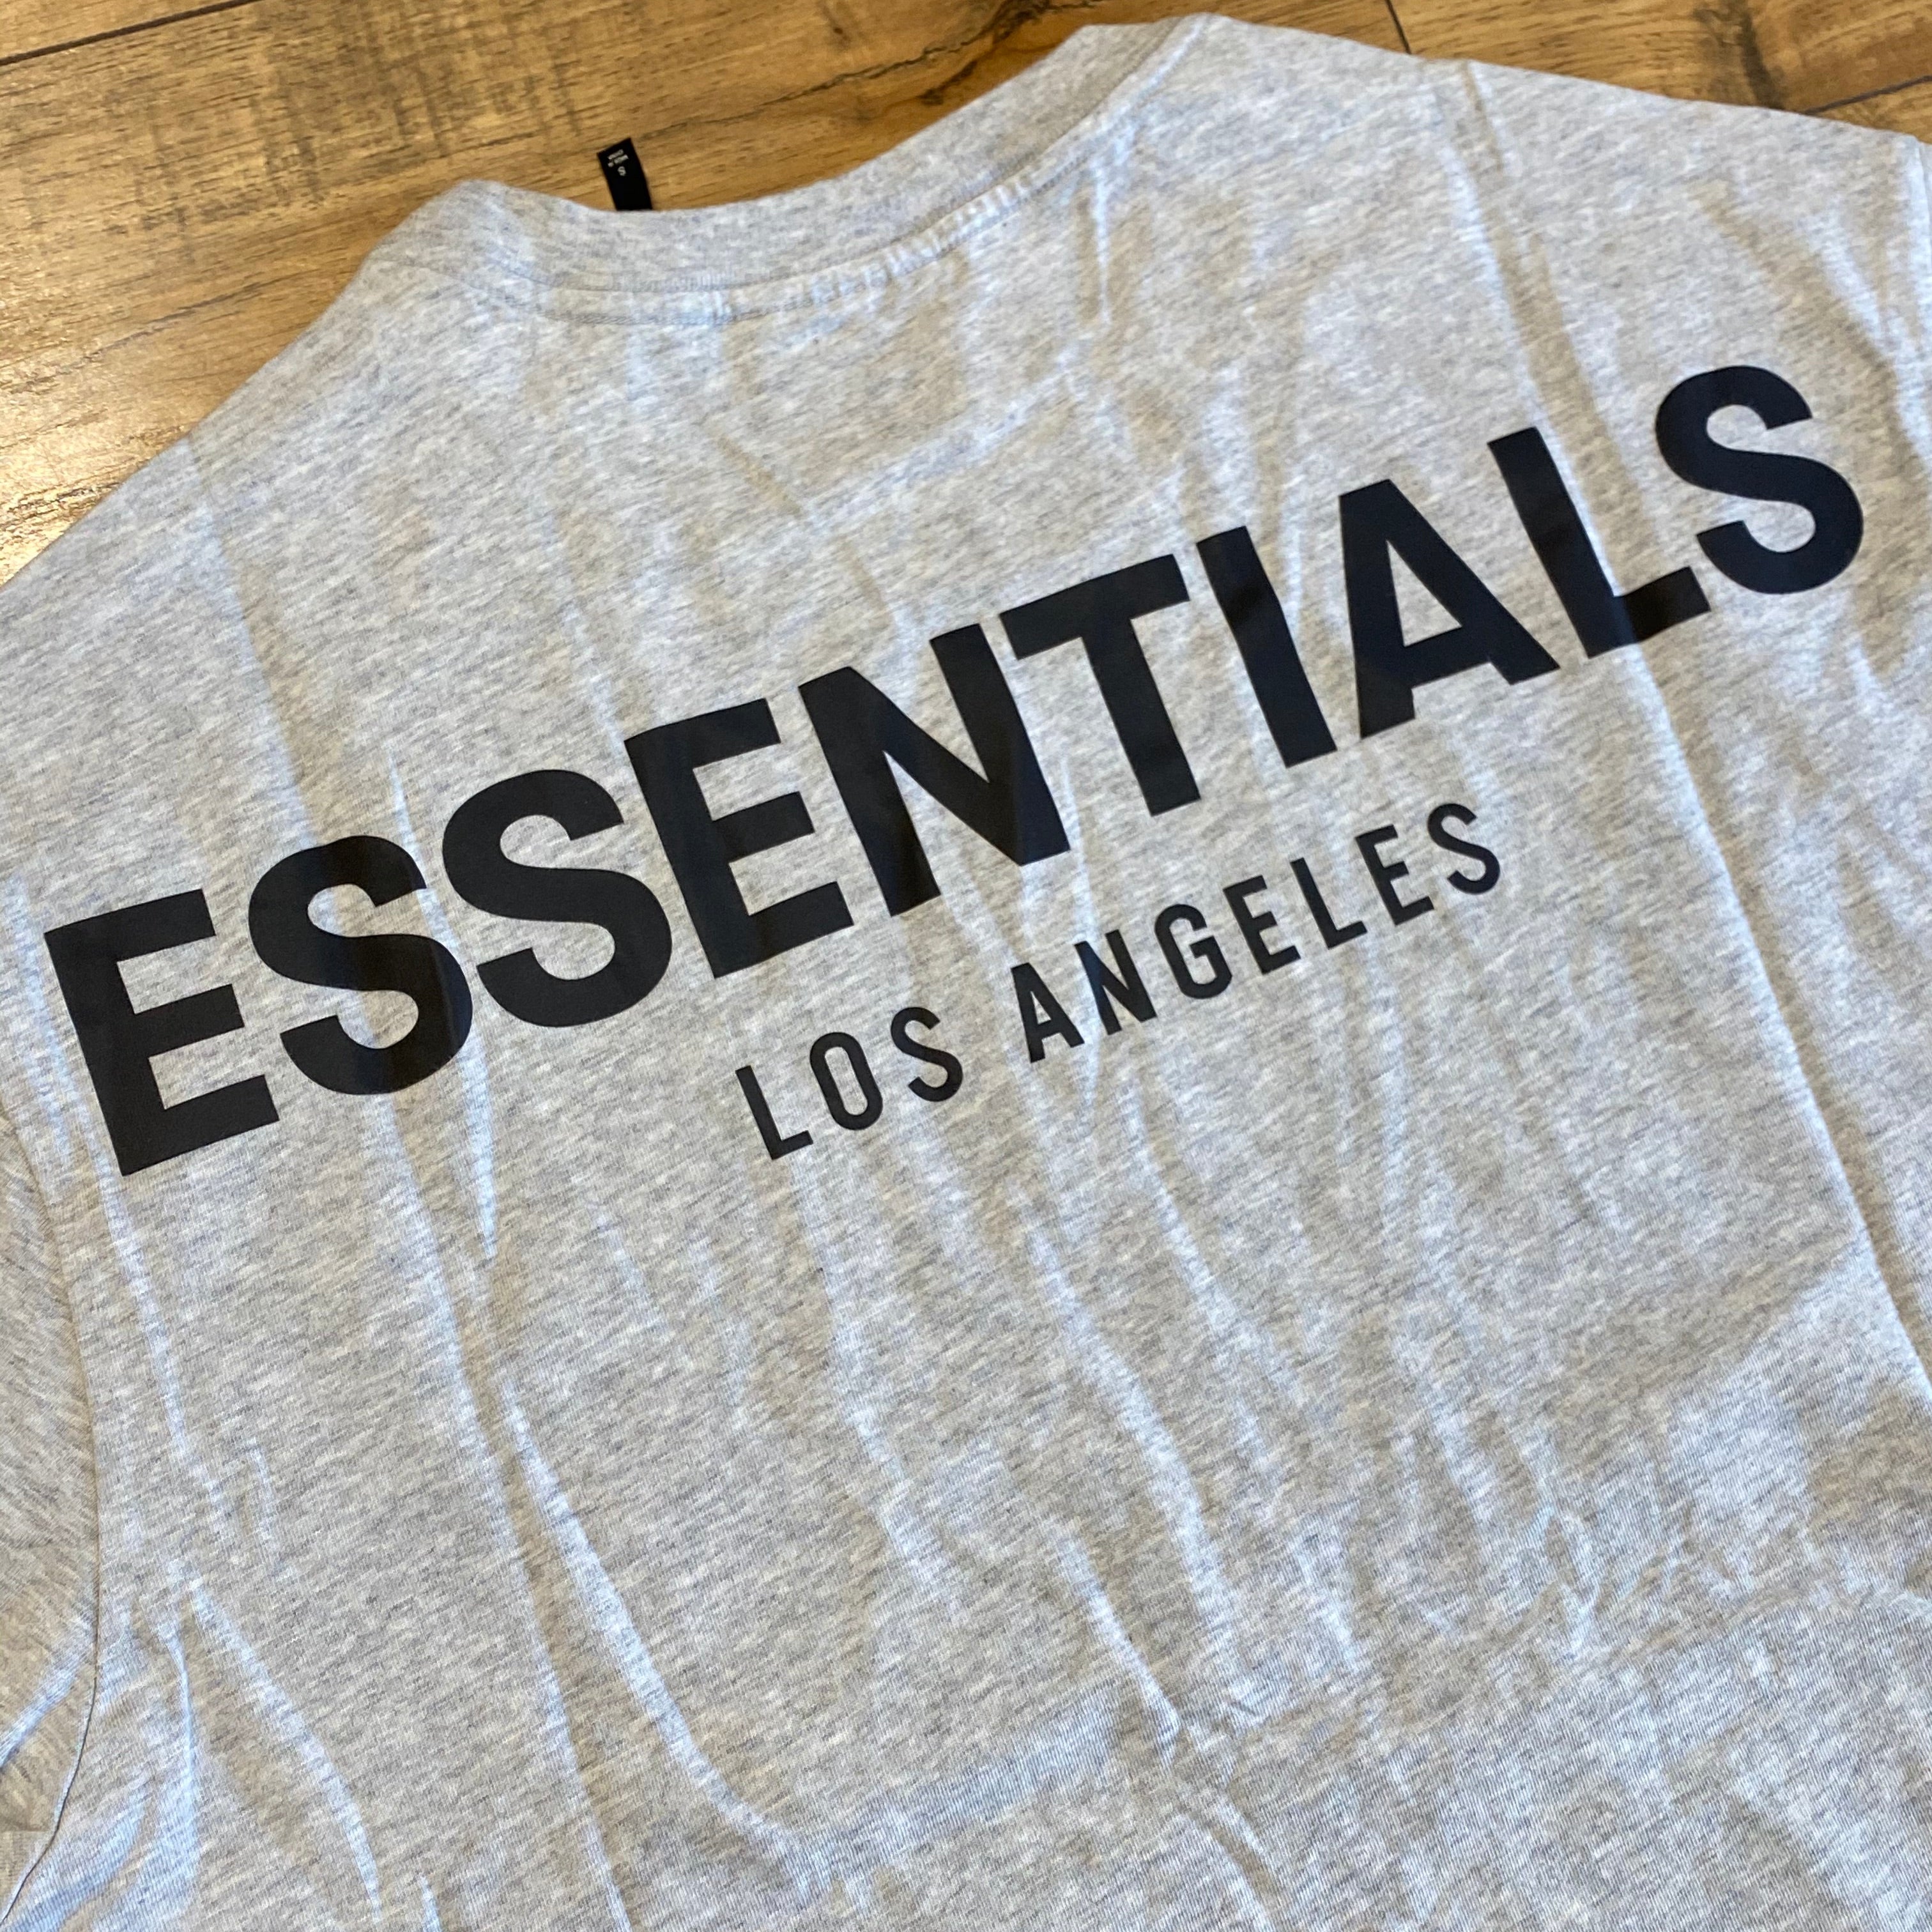 fear of god essentials los angeles tee